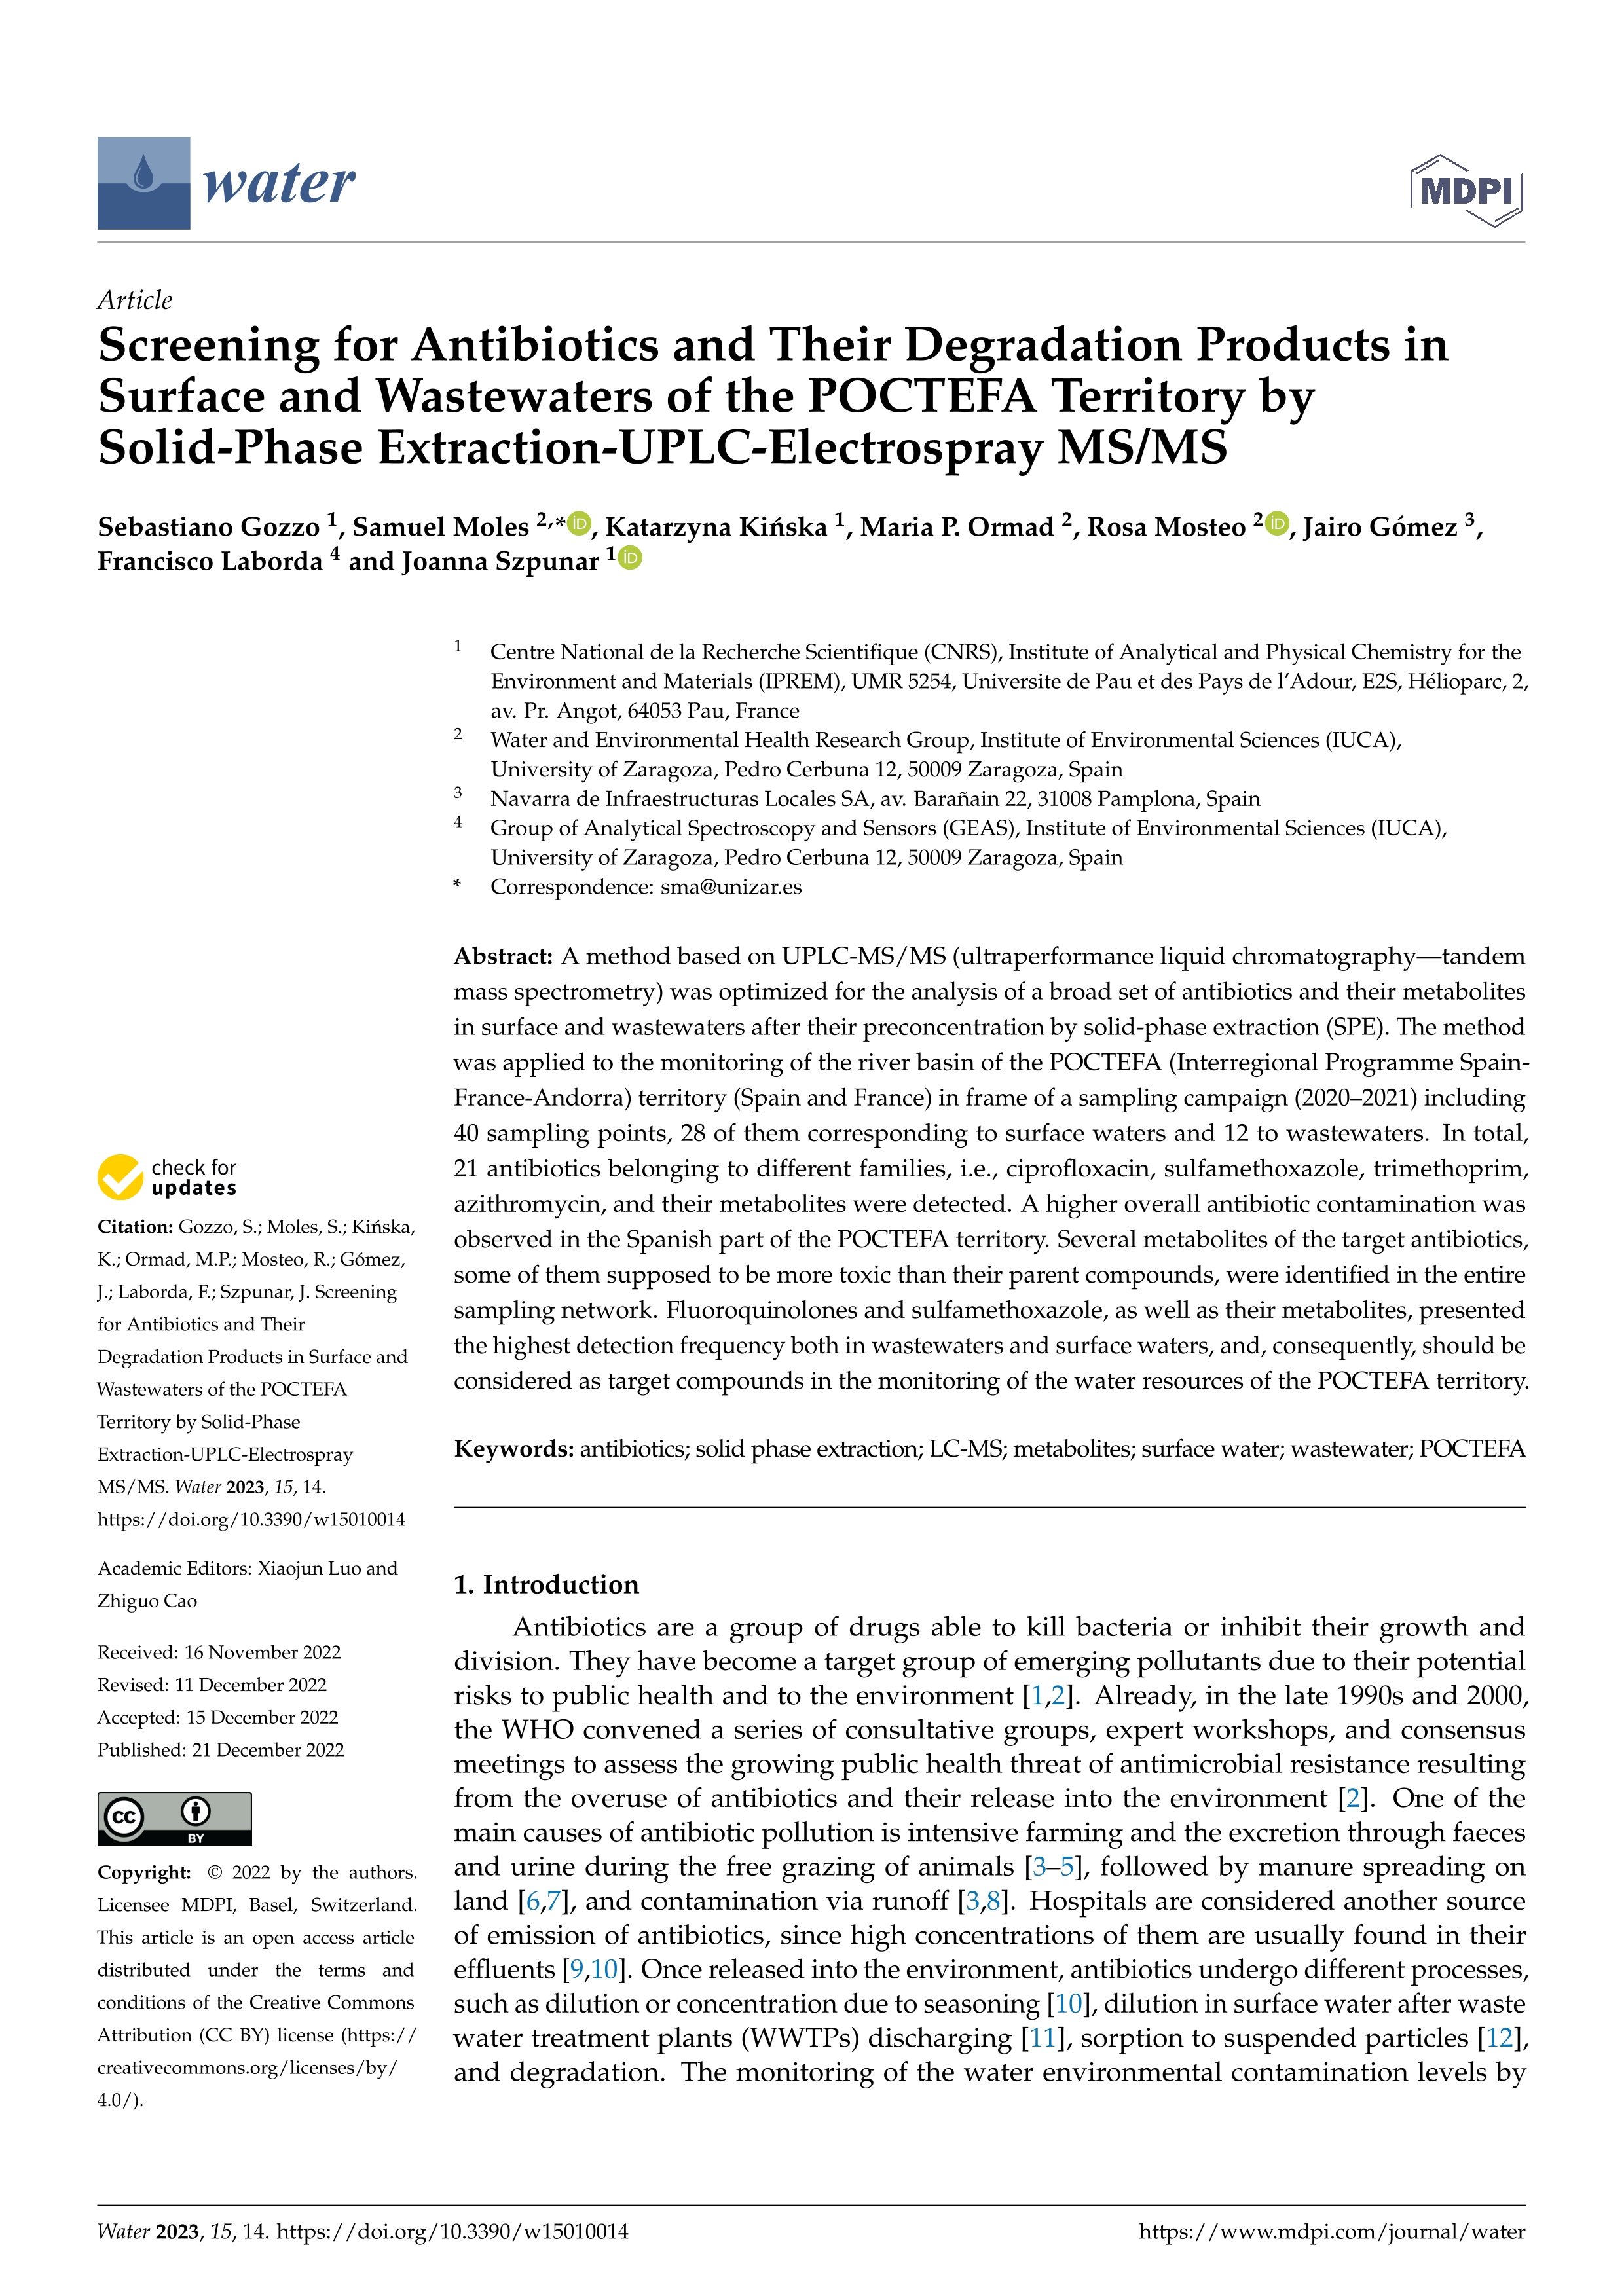 Screening for antibiotics and their degradation products in surface and wastewaters of the POCTEFA territory by solid-phase Extraction-UPLC-Electrospray MS/MS